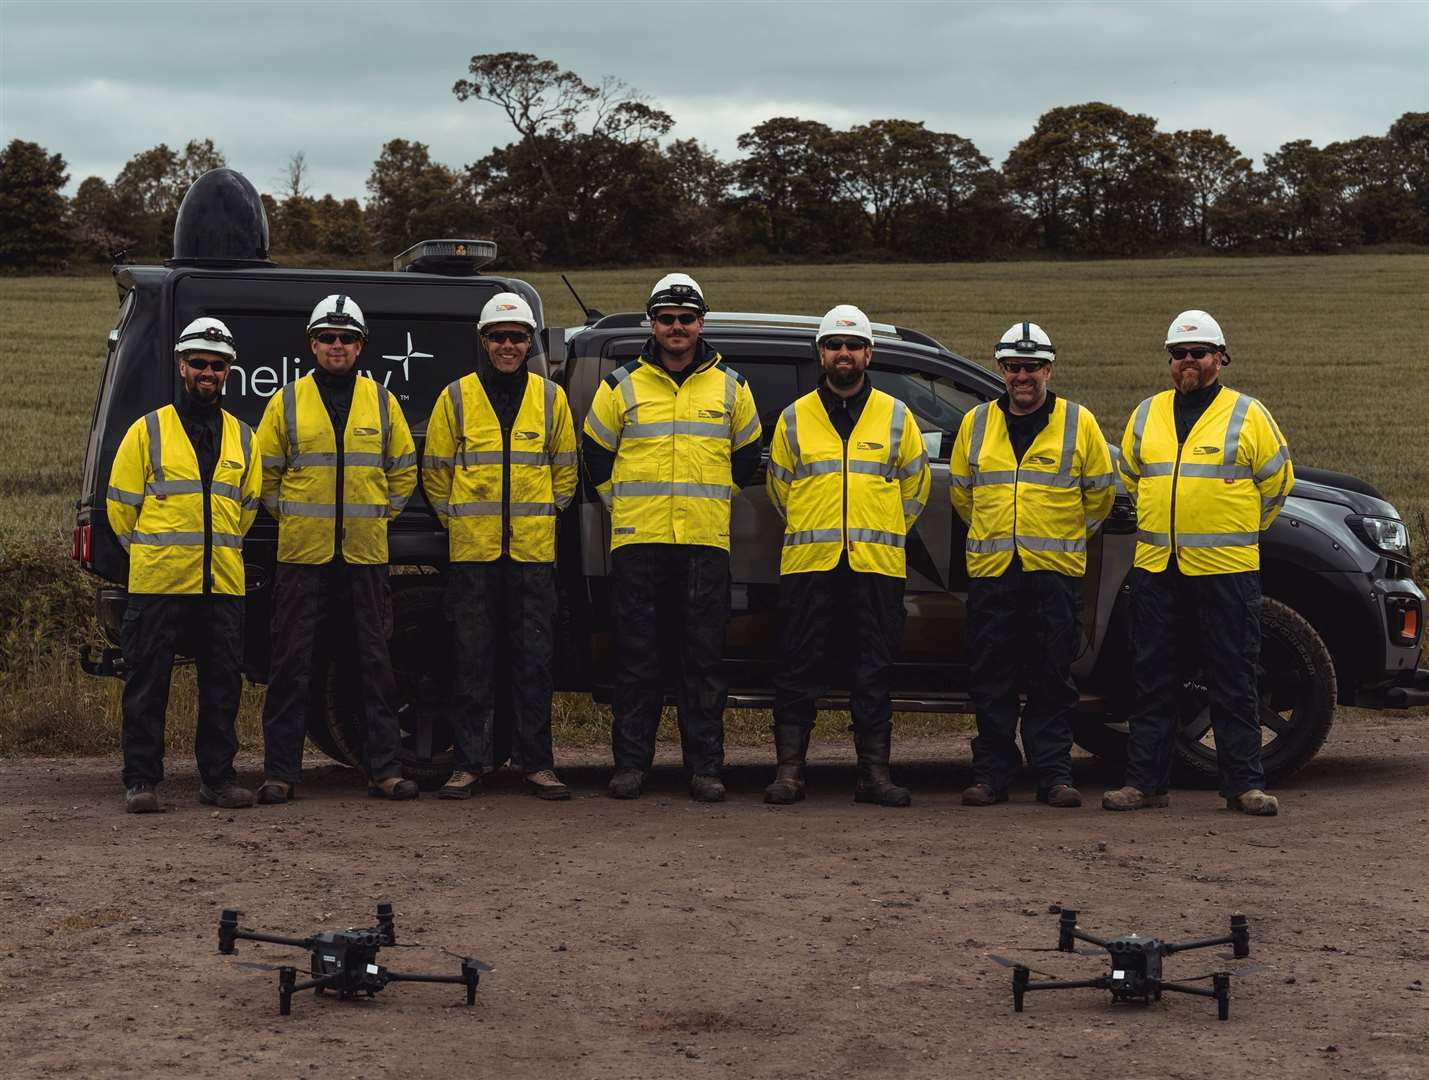 UKPN engineers are being trained in piloting the Heliguy drones. Picture: Heliguy Jack Sharpe